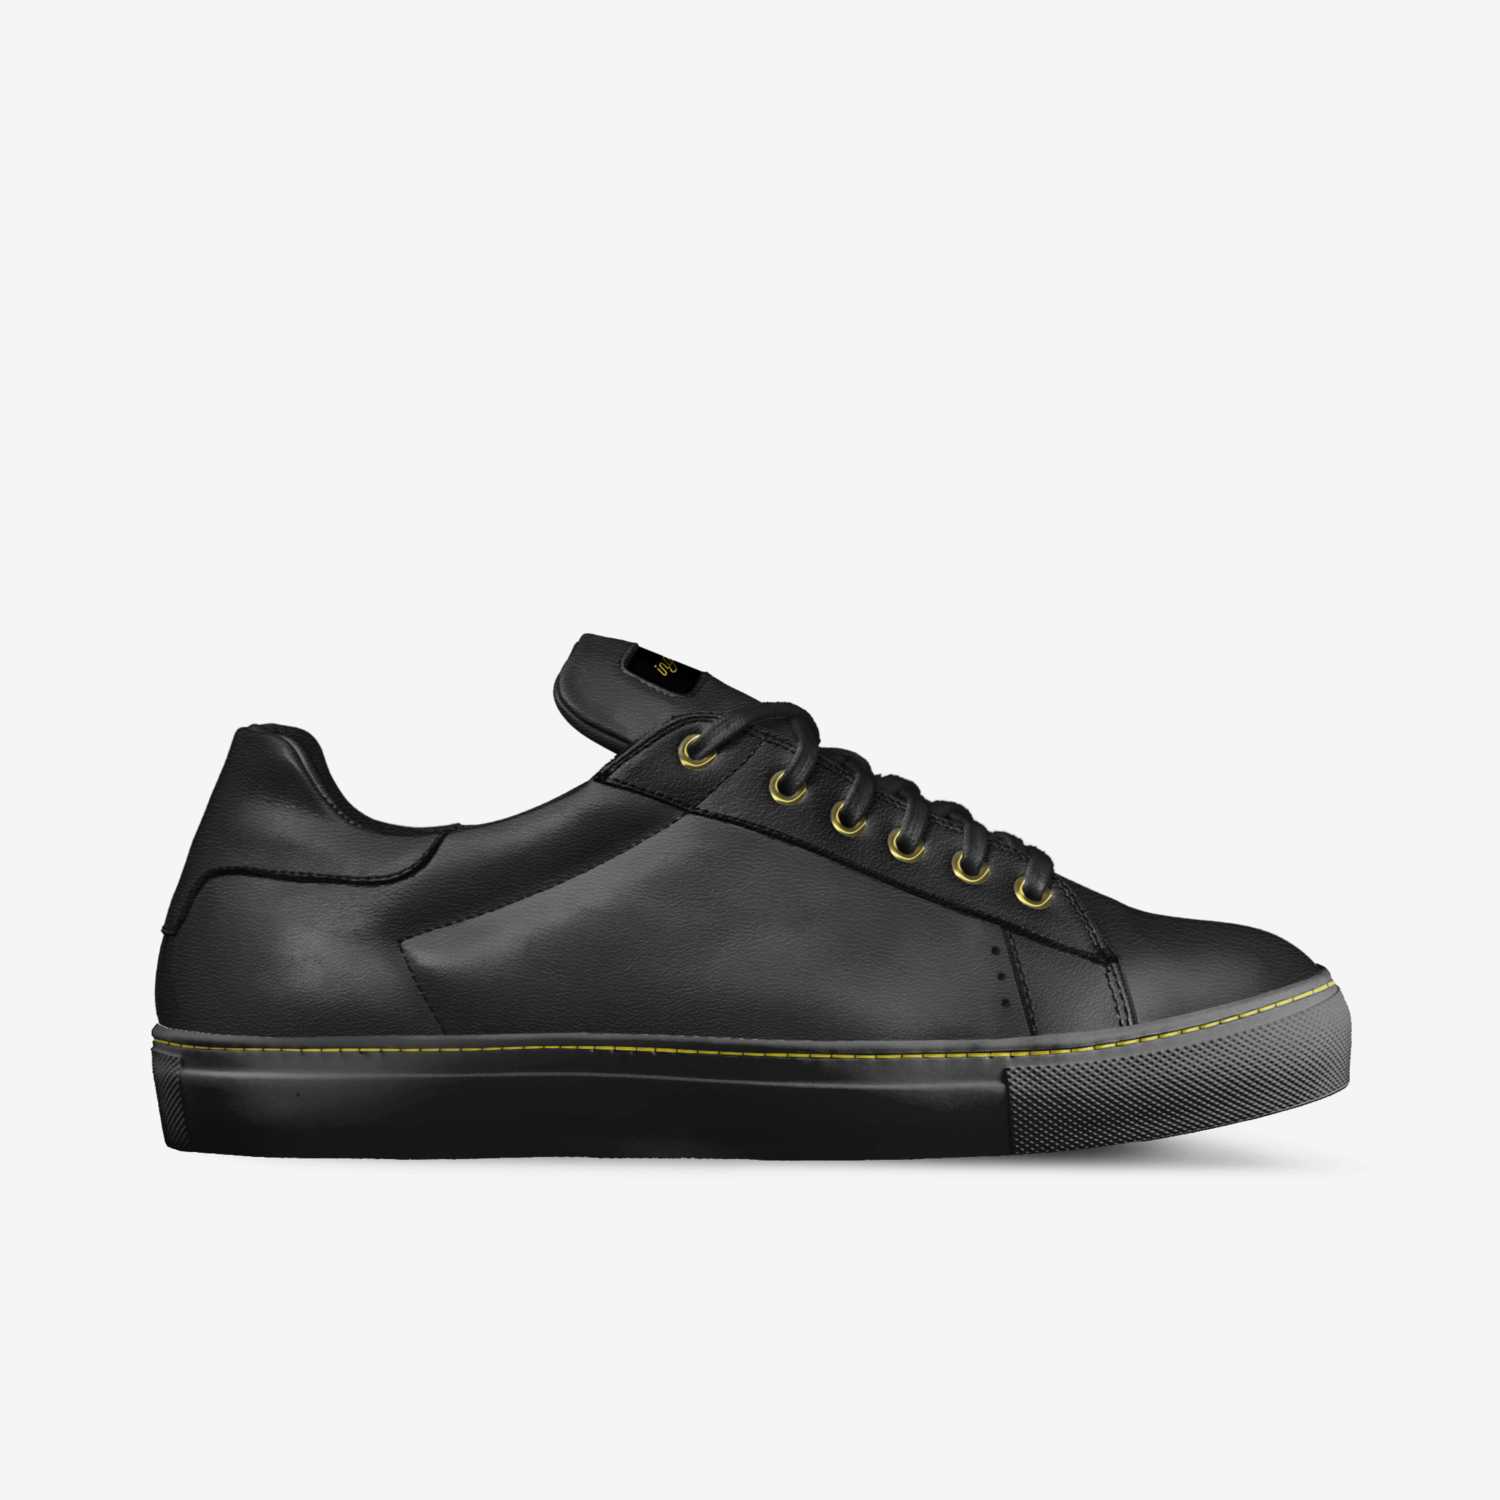 UBC low custom made in Italy shoes by Jeremy Mortas | Side view